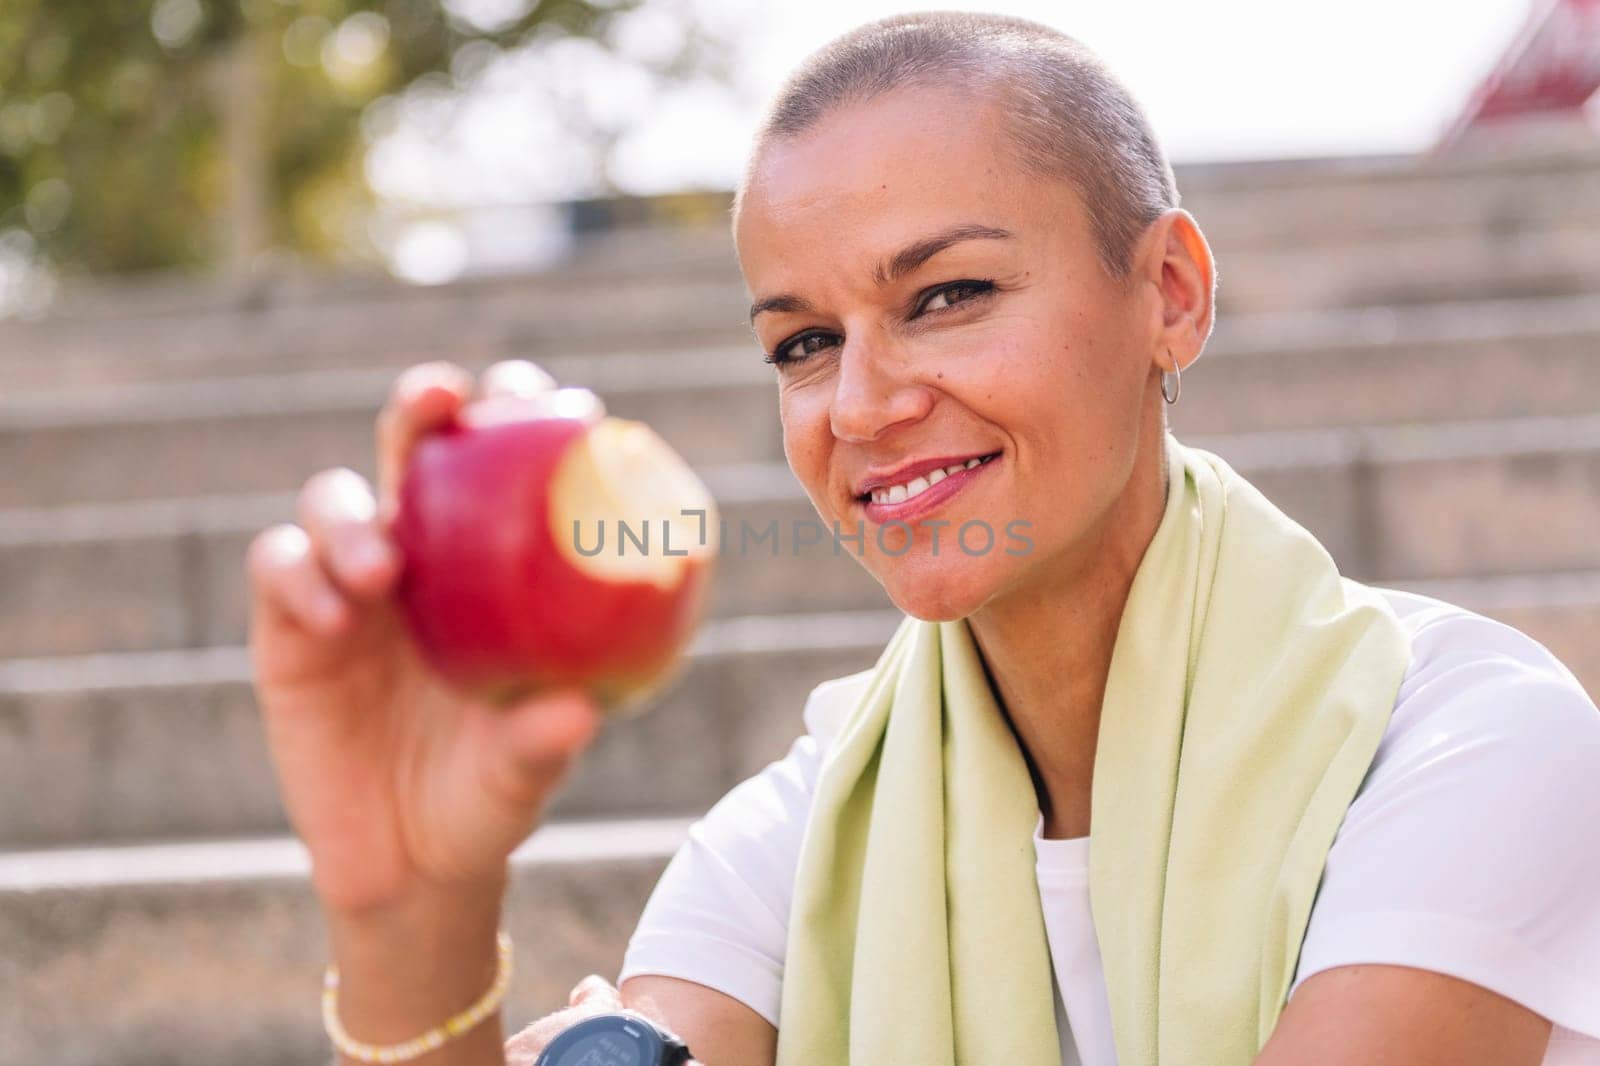 happy sports woman showing a bitten apple after workout, concept of healthy and active lifestyle, focus on the smiling face